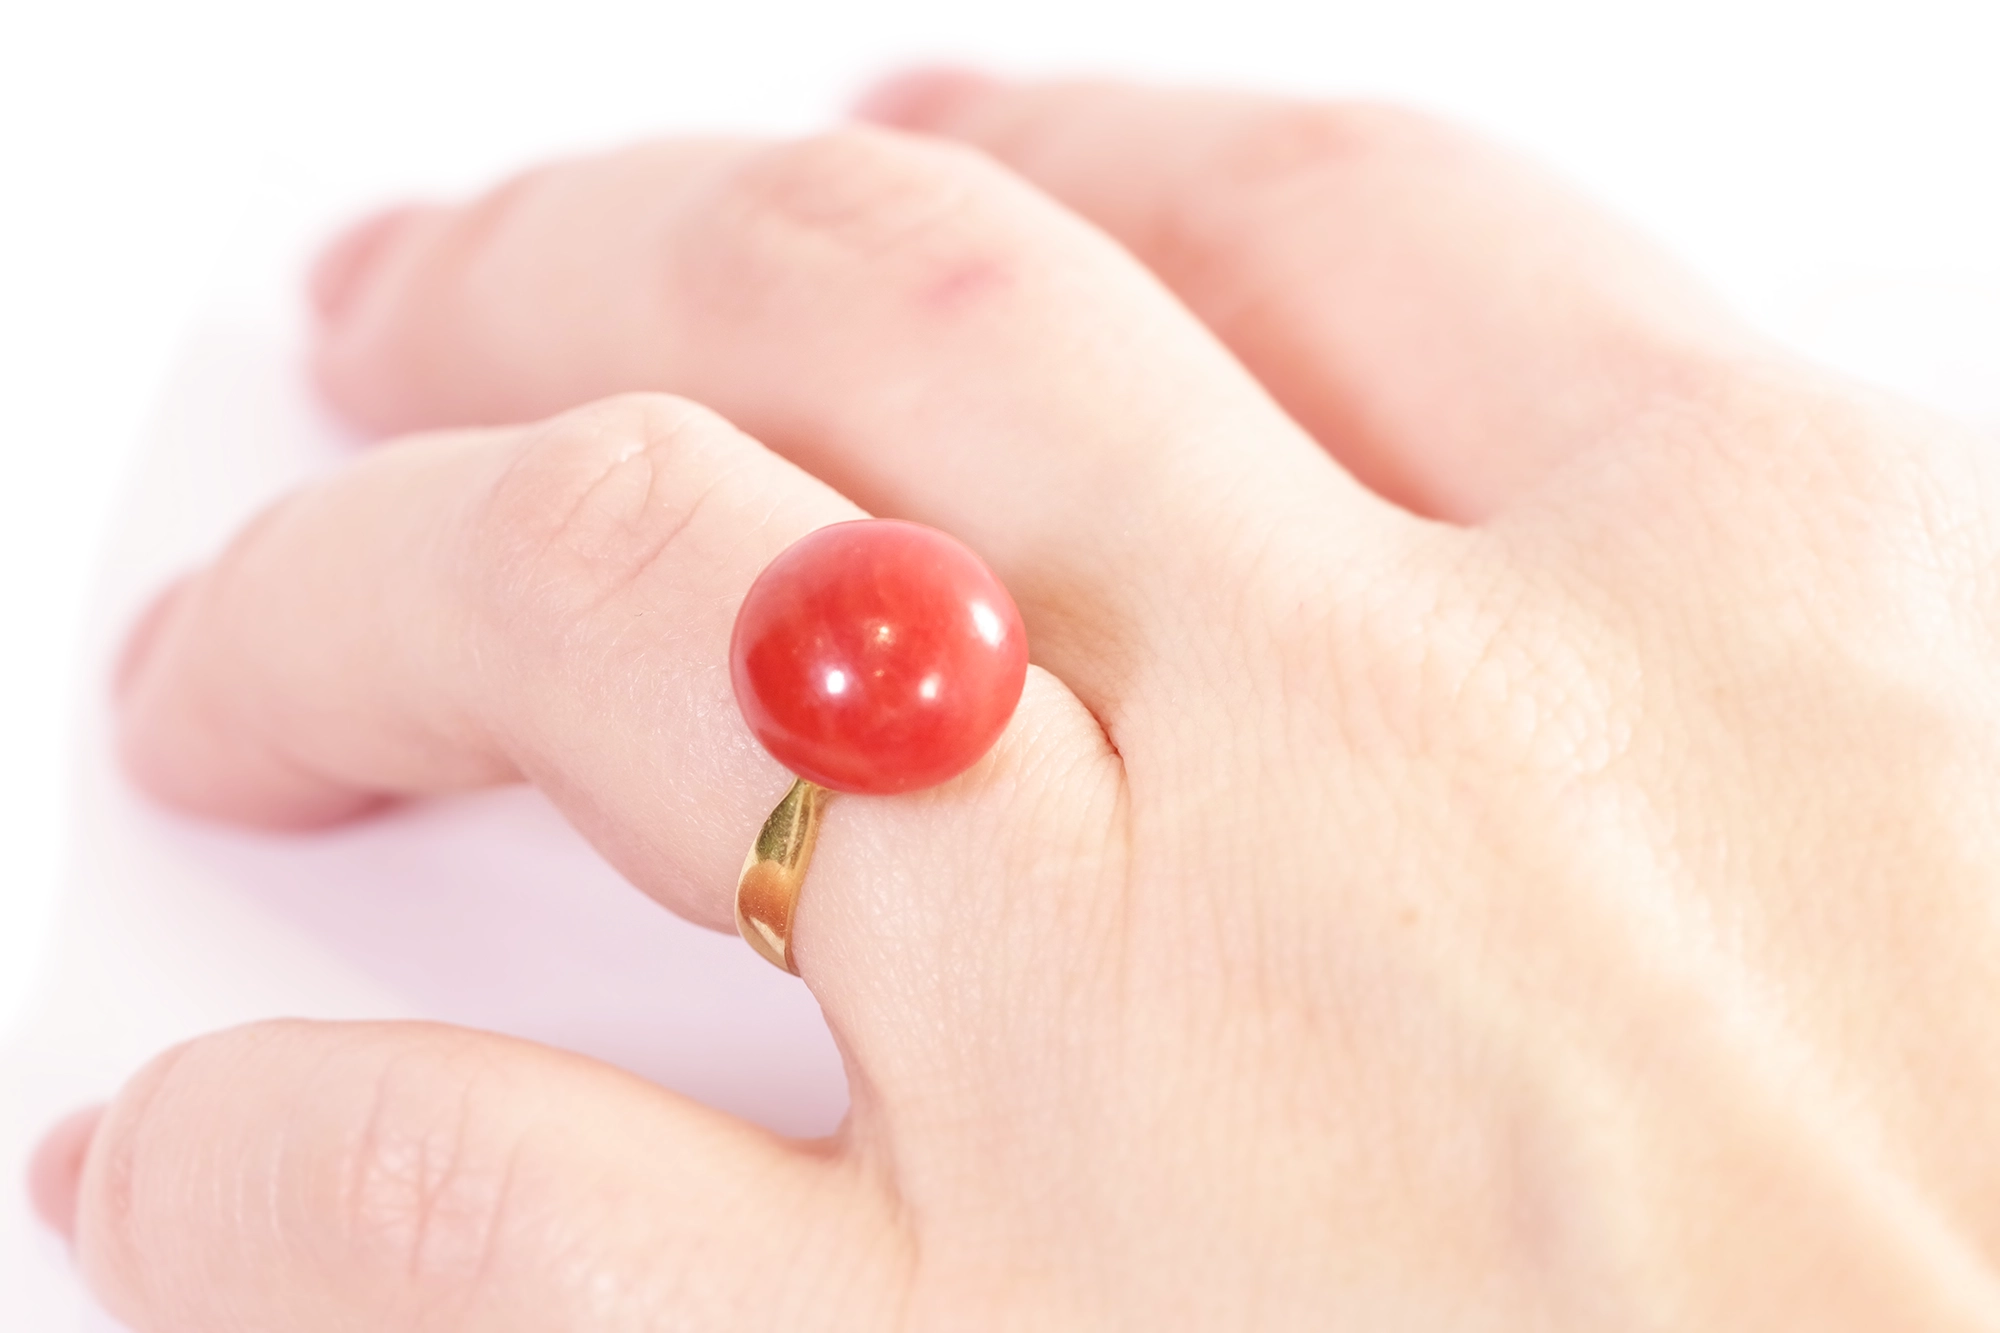 Buy Red Coral Moonga 5.25-5.50 Ratti Mangal, Mars Gemstone, Embedded in  PanchDhatu Finger Ring (Adjustable) by Ceylonmine Online - Get 79% Off